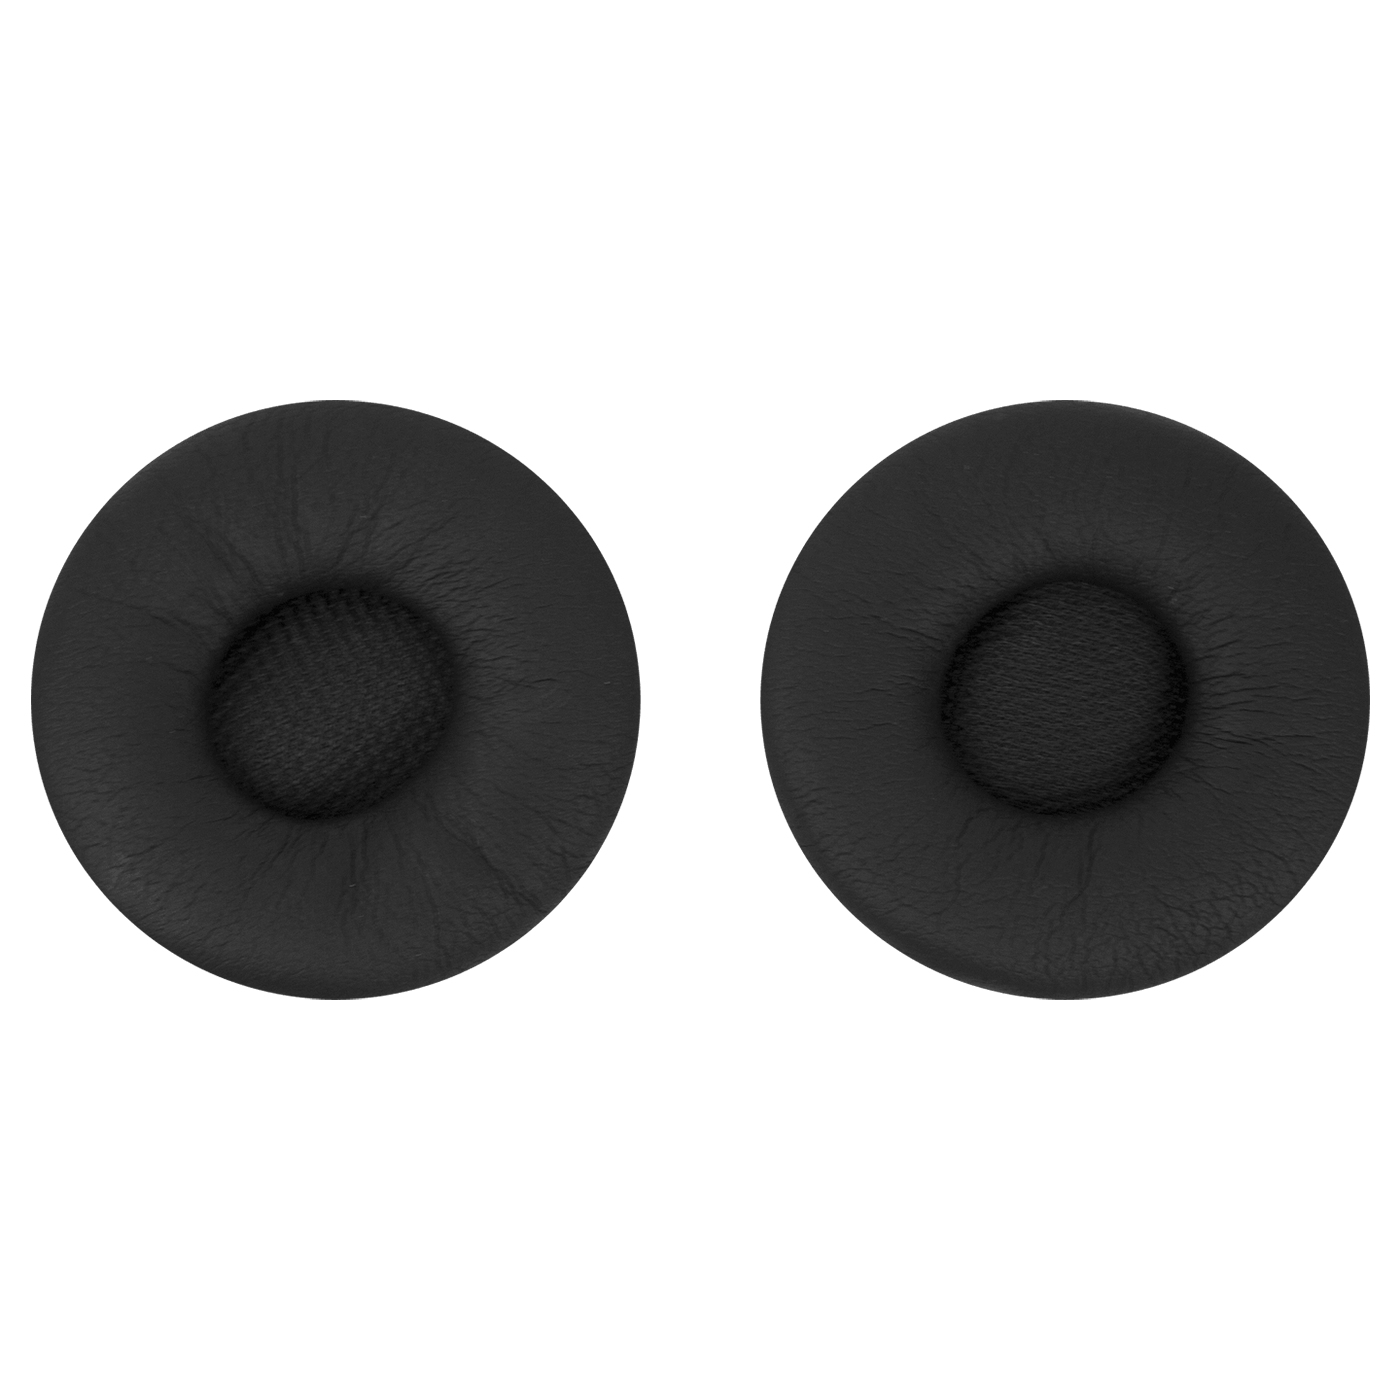 Jabra - Earpads For Headset - For PRO 9460, 9460 Duo, 9465 Duo, 9470 14101-19 - C2000